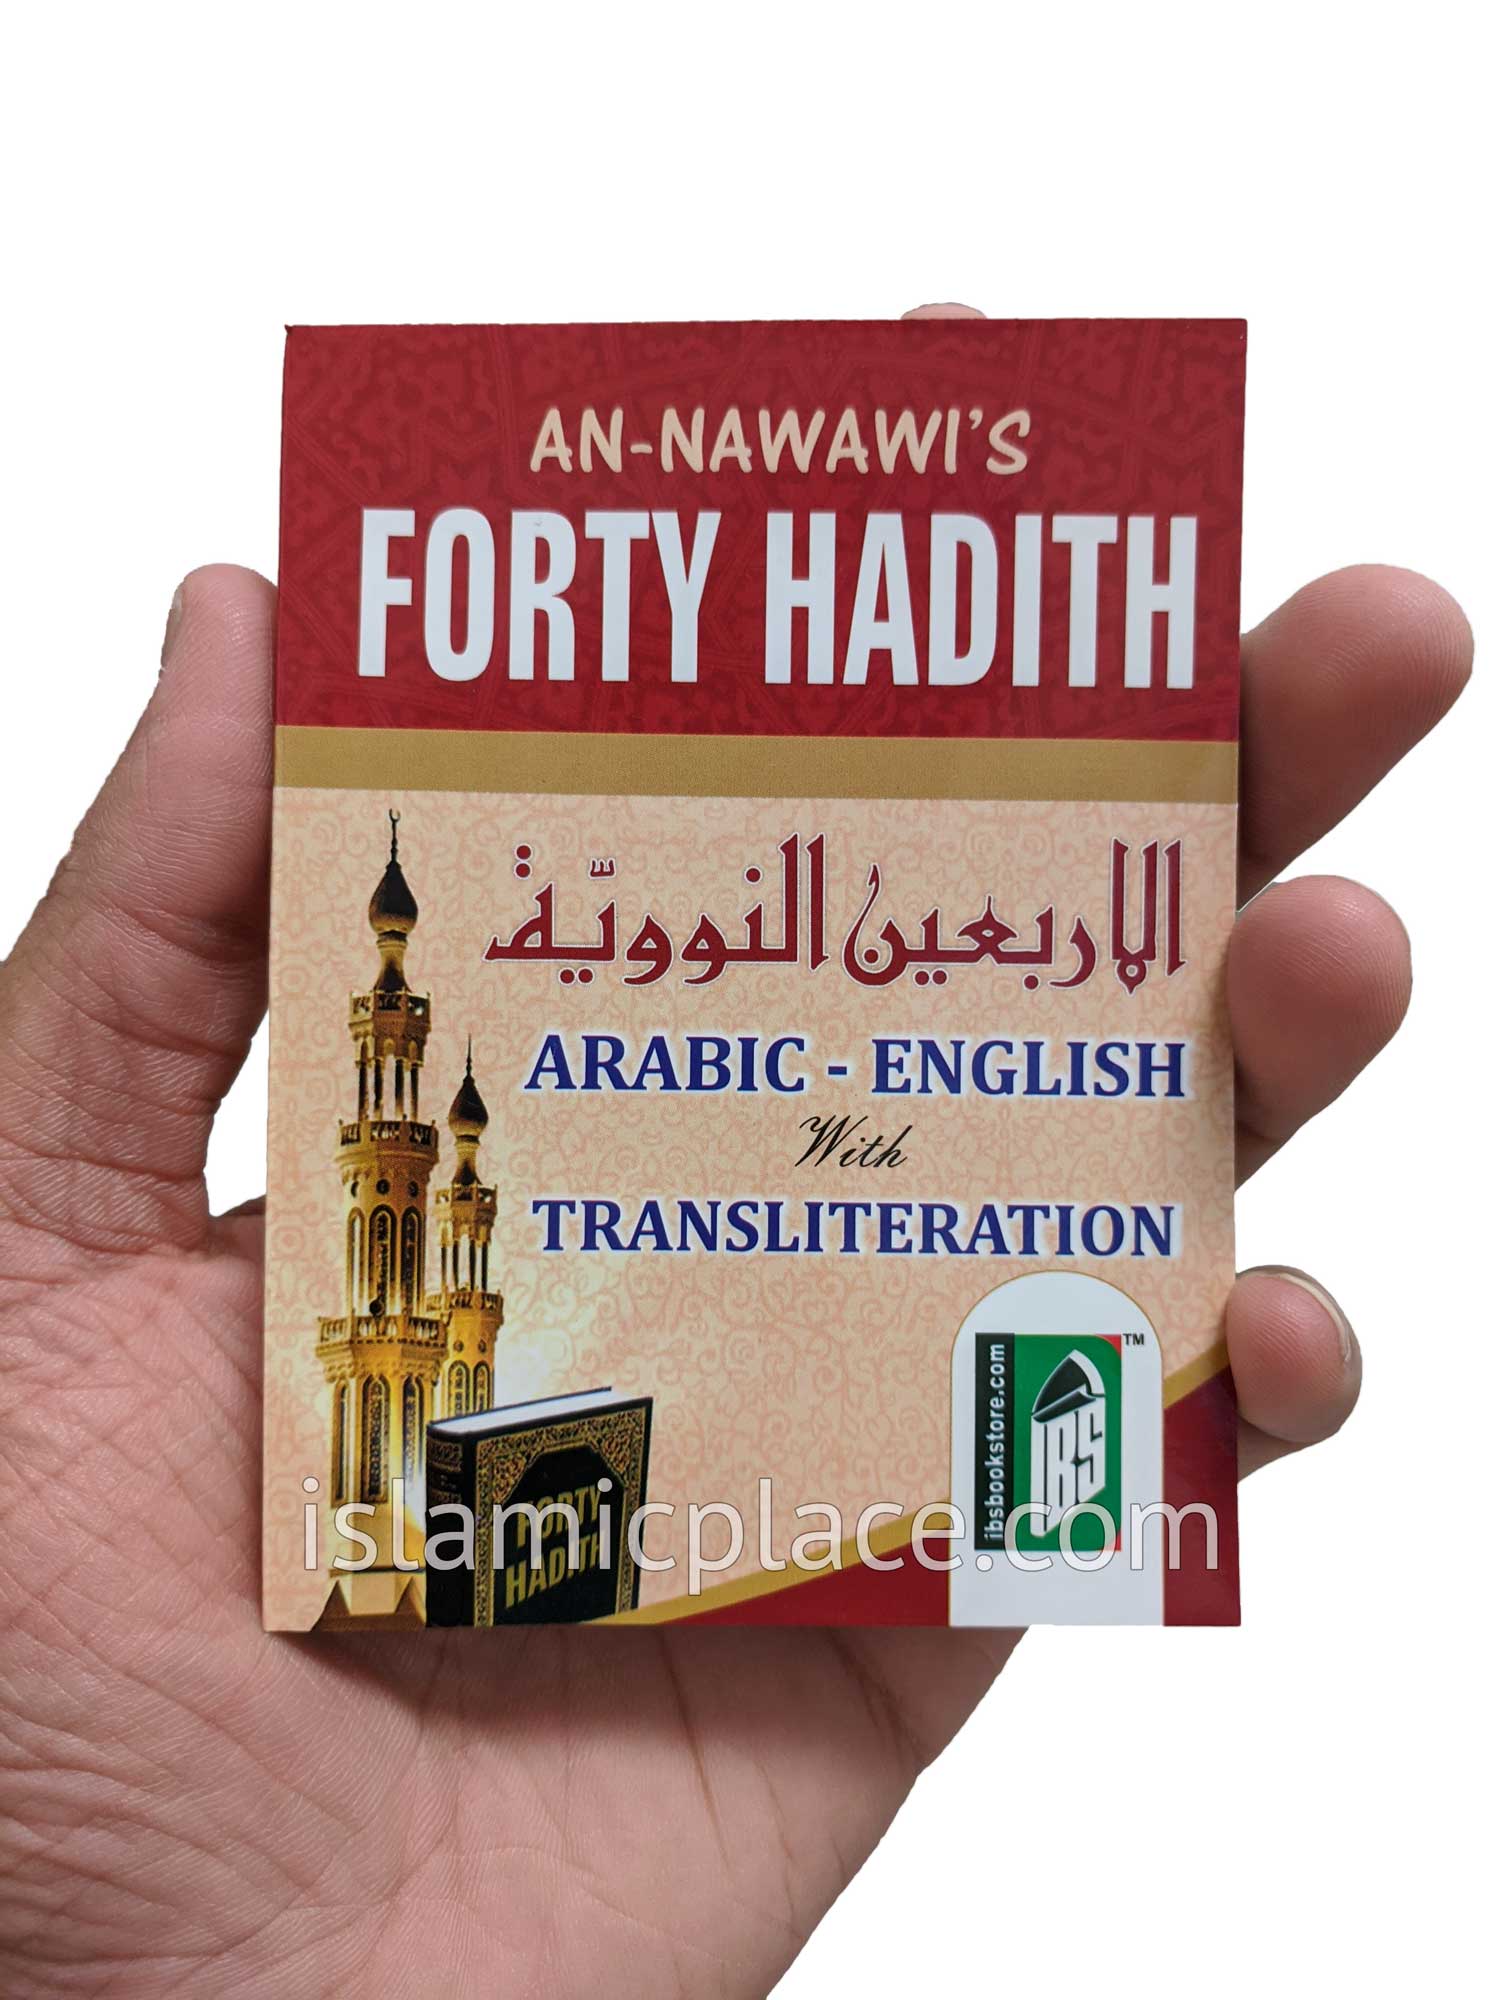 An-Nawawi's Forty Hadith (pocket size) Arabic & English with Transliteration - 40 Hadith